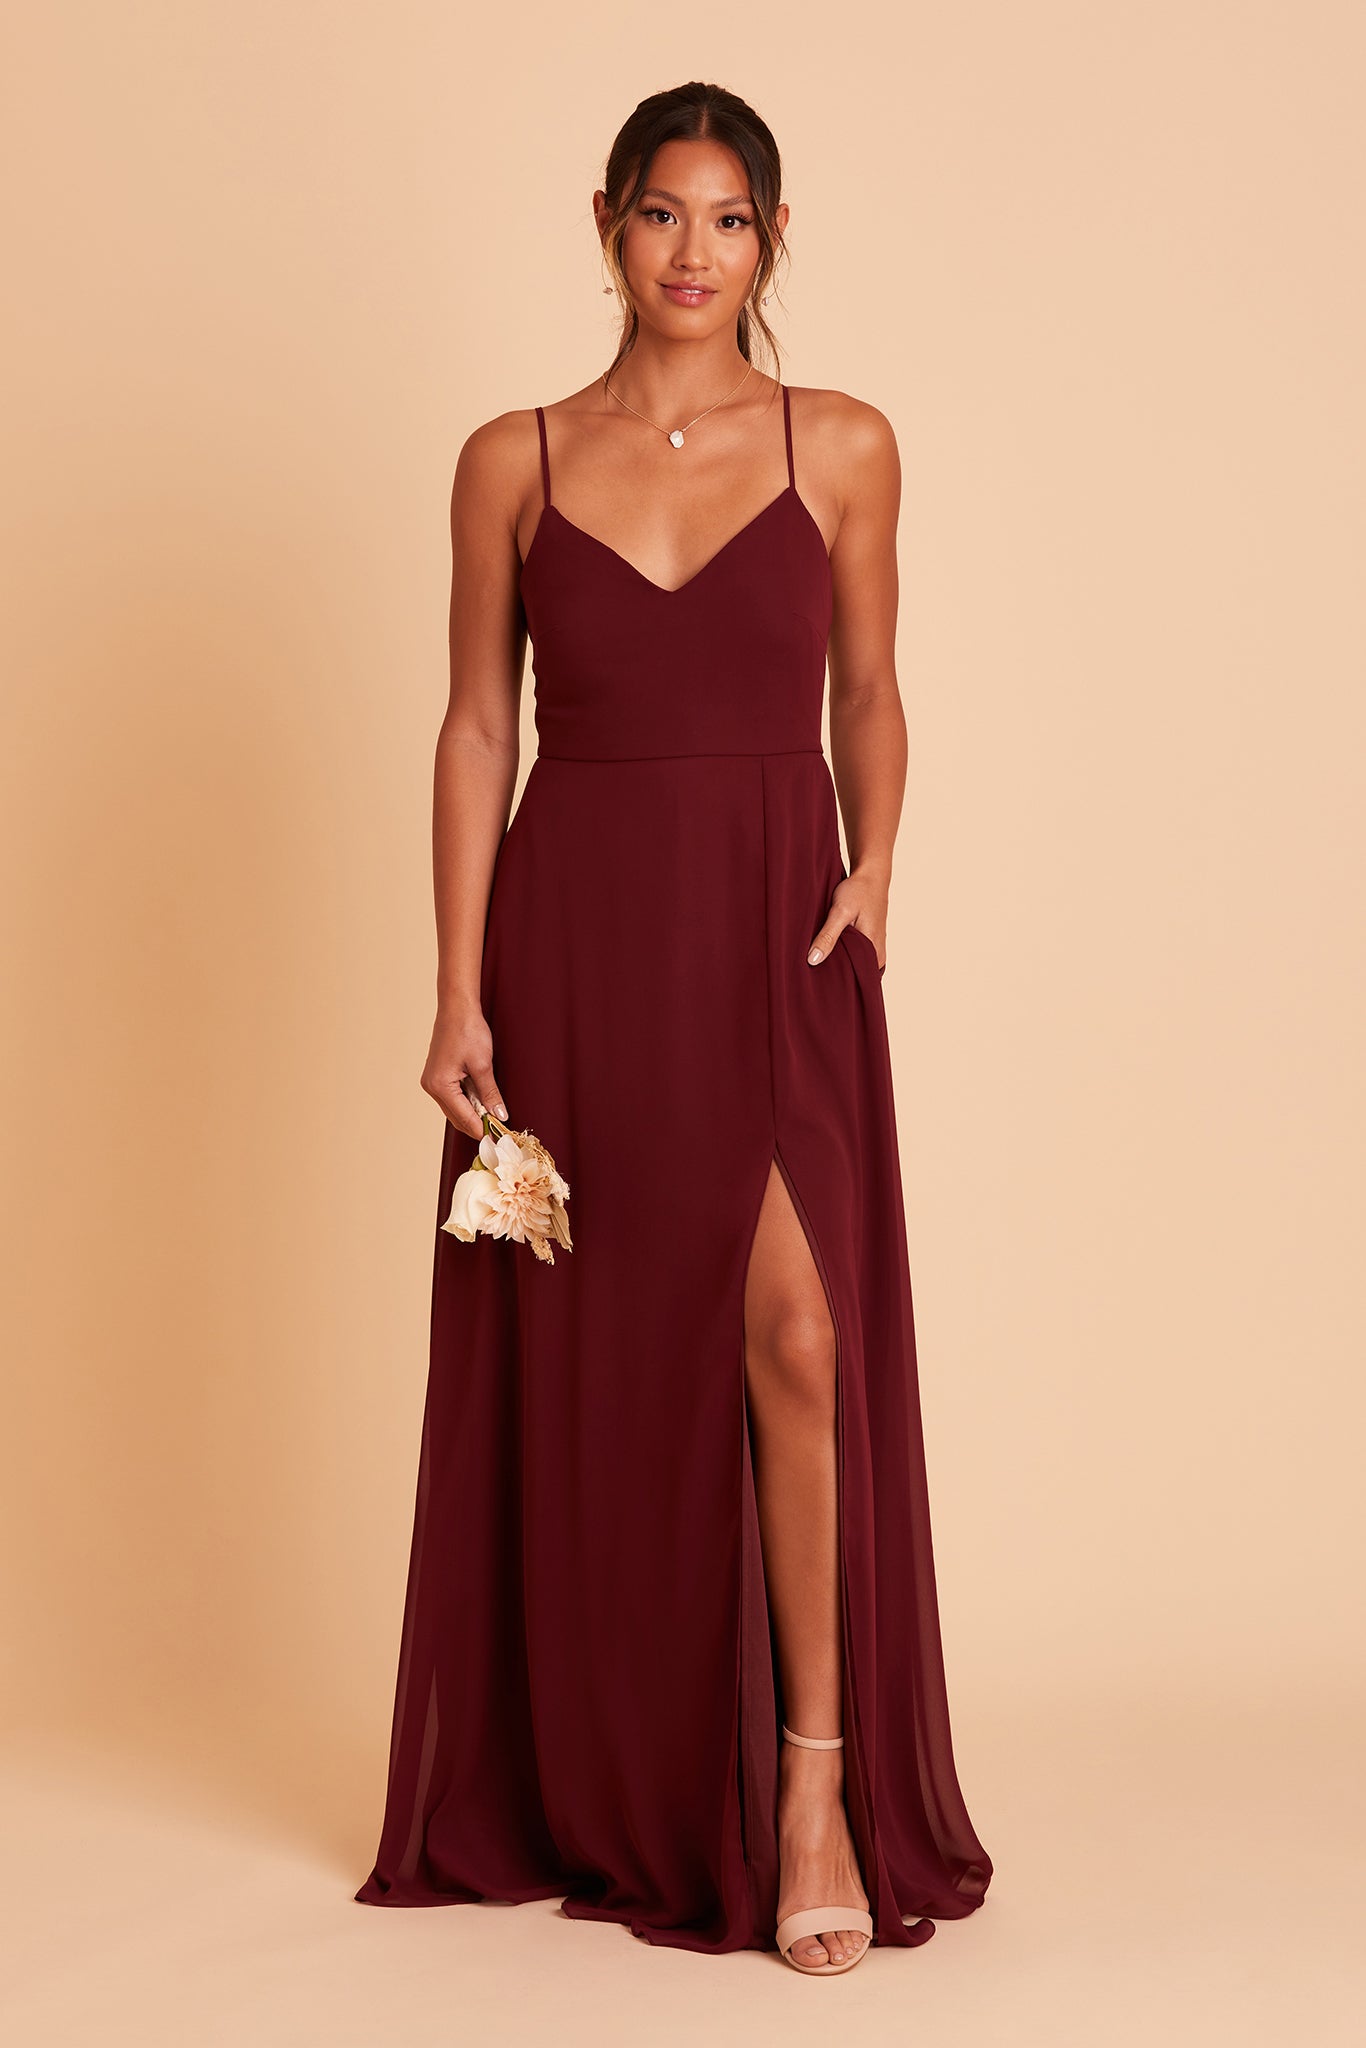 Adelle bridesmaid dress with slit in cabernet burgundy chiffon by Birdy Grey, hand in pocket, front view